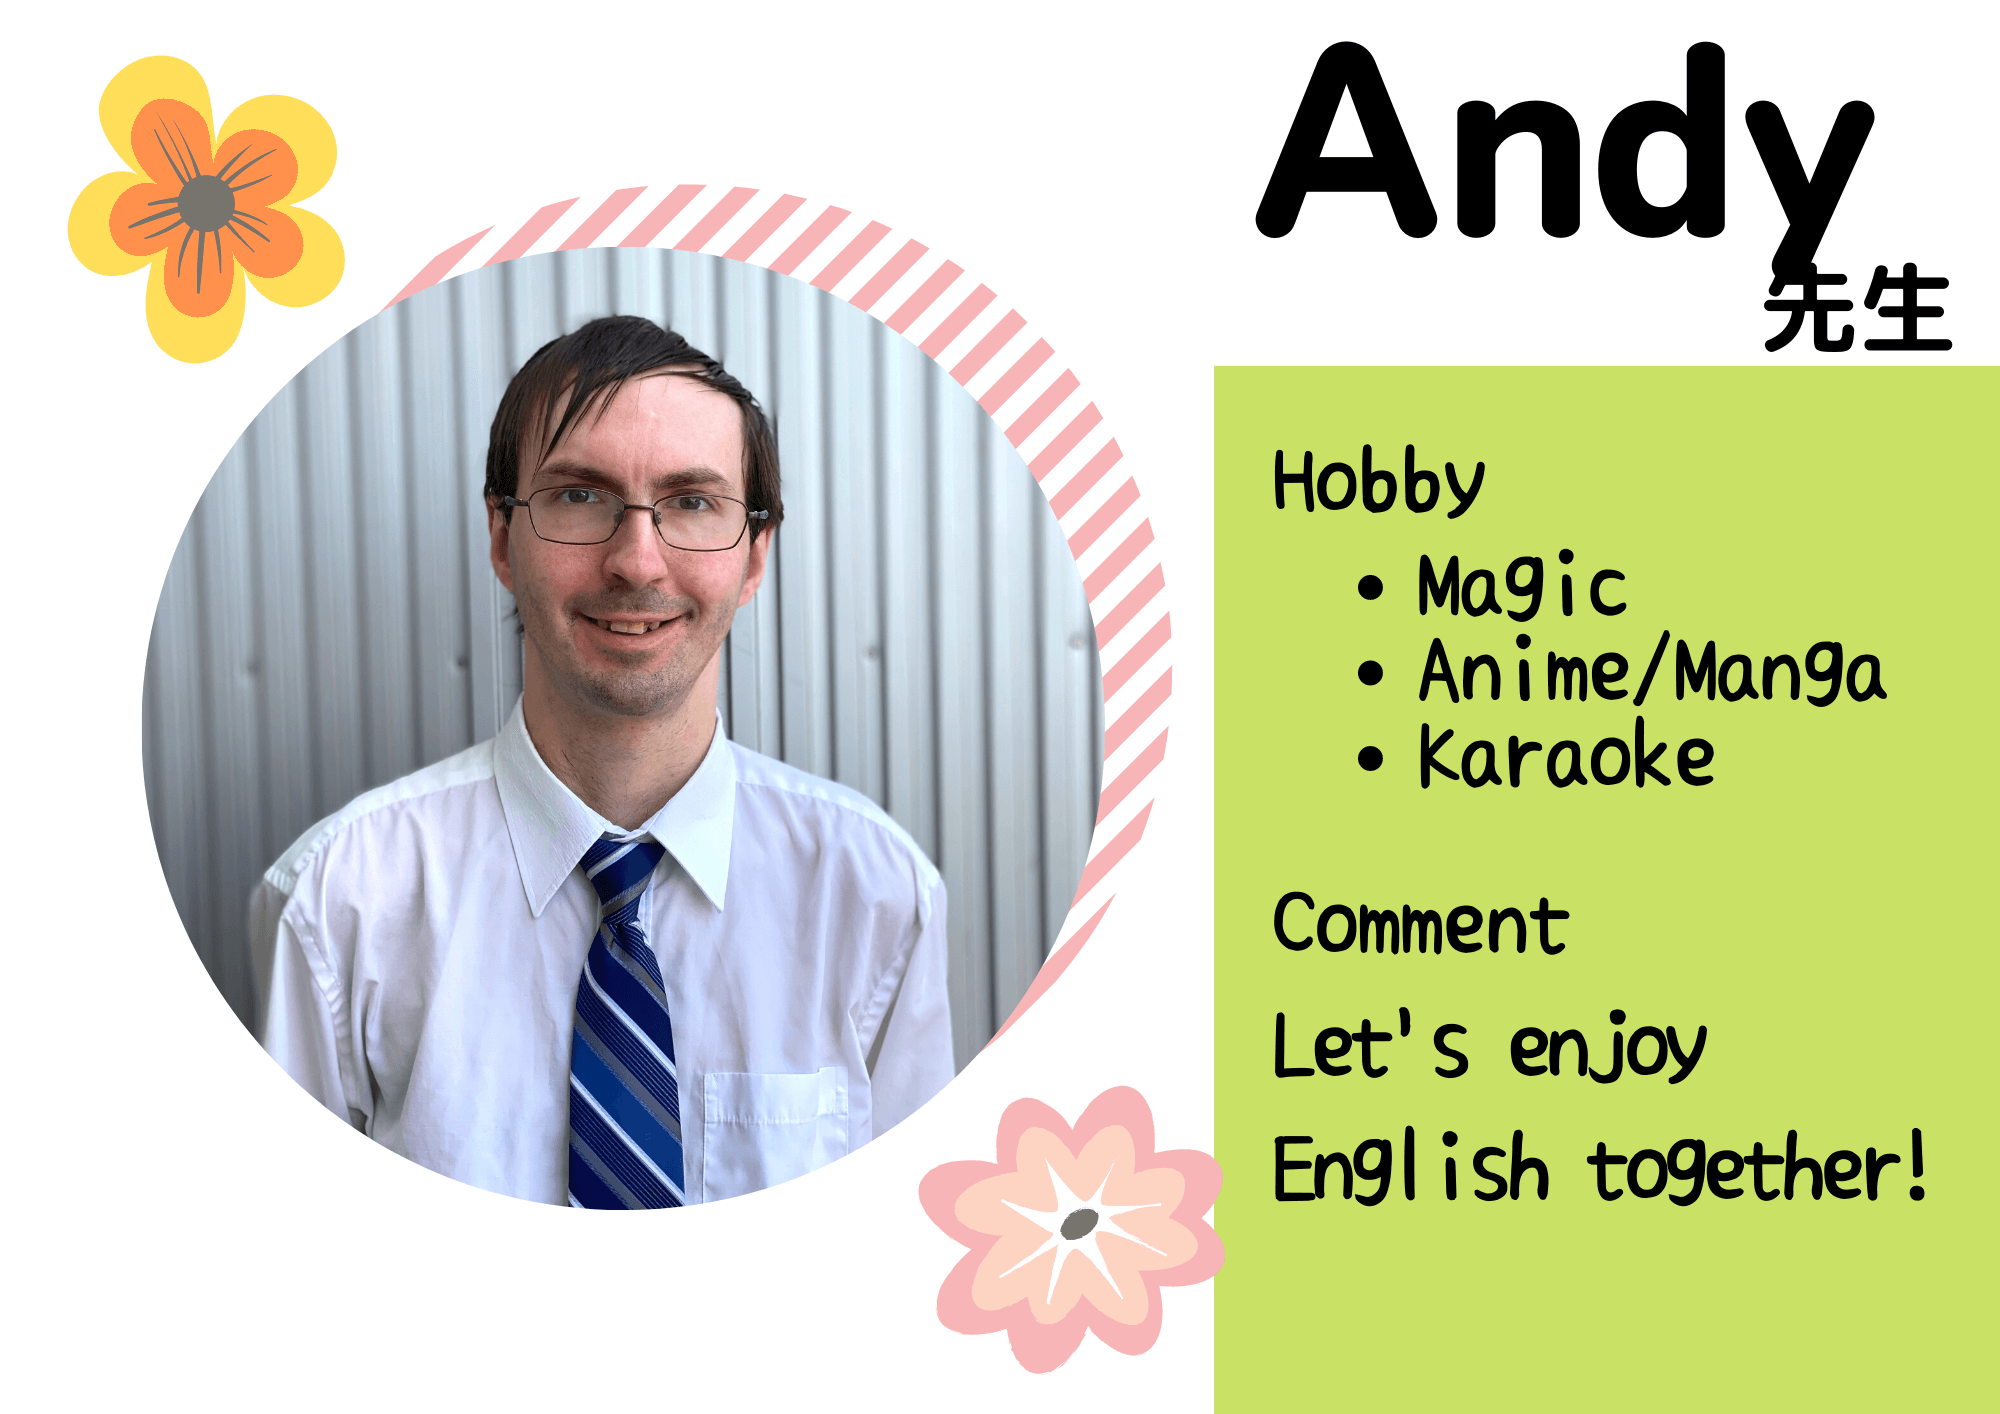 Andy先生